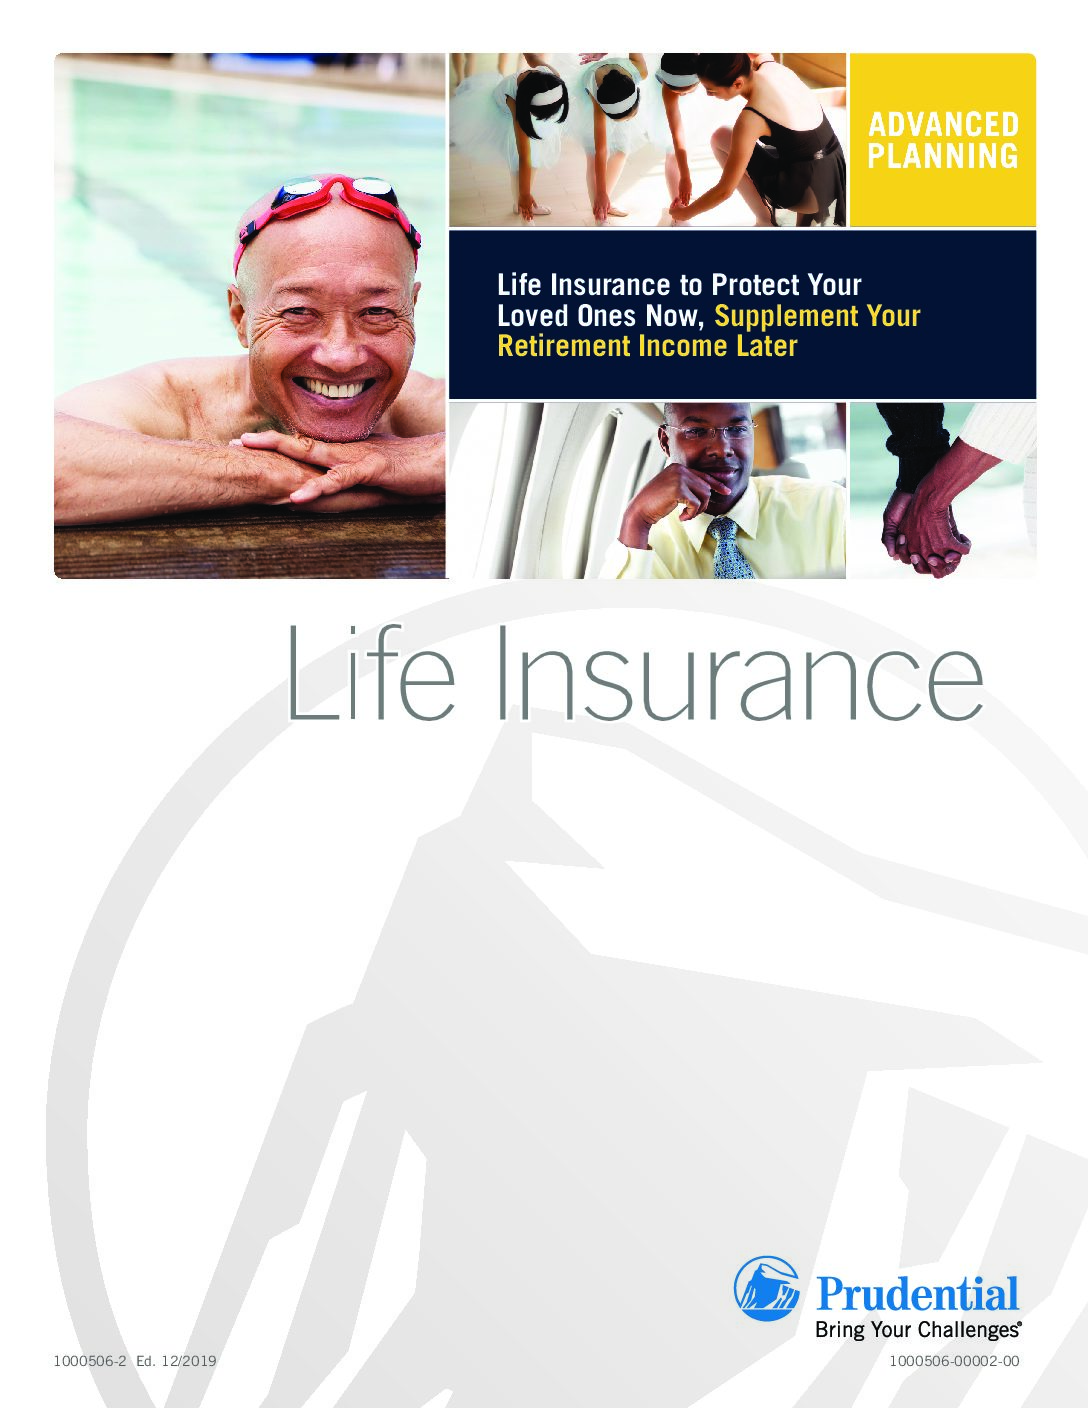 Using Life Insurance  to Supplement Retirement Planning